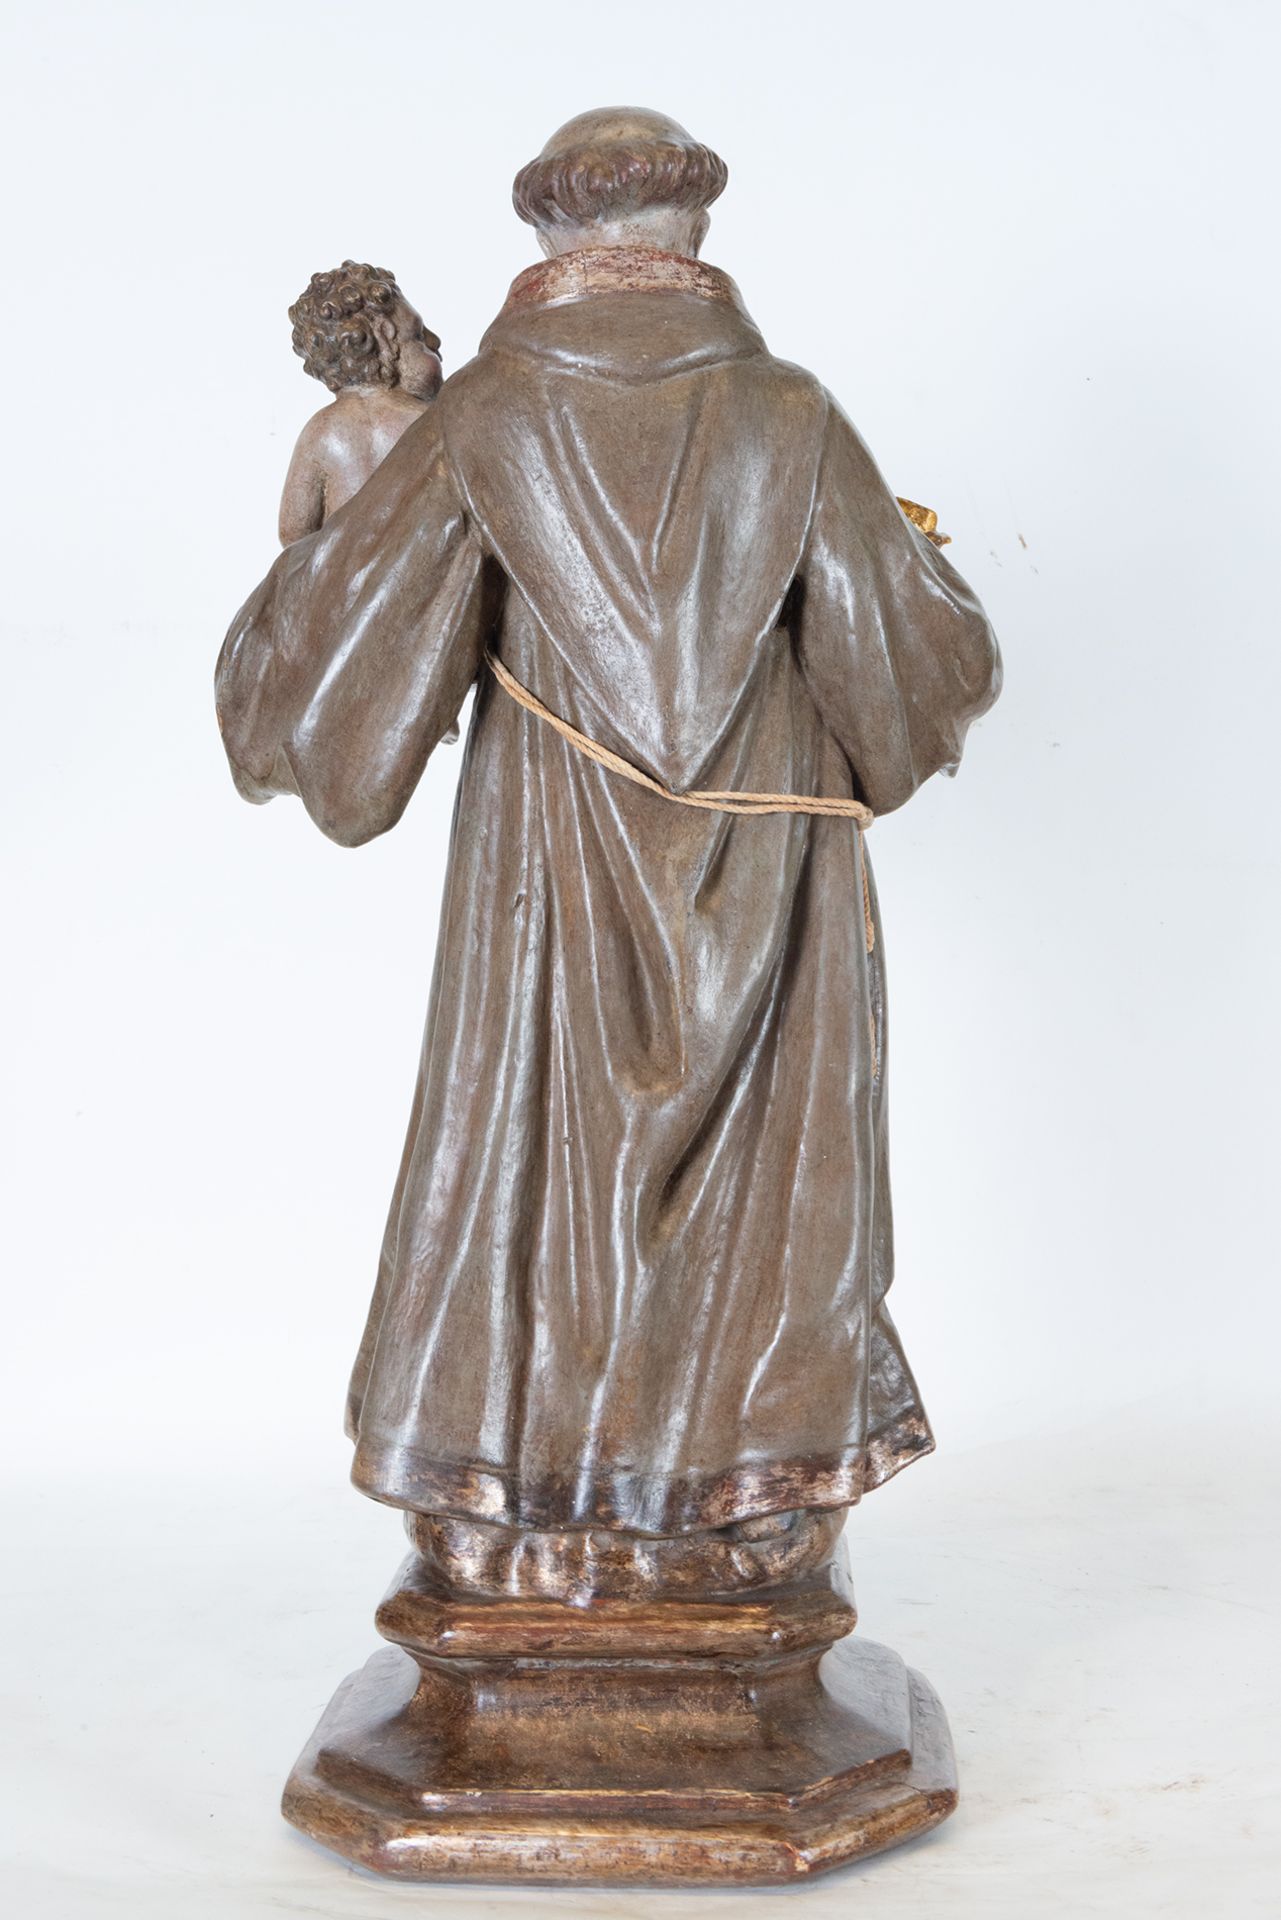 Saint Anthony with the Child Jesus in Arms, Catalan school of the 18th century - Image 5 of 5